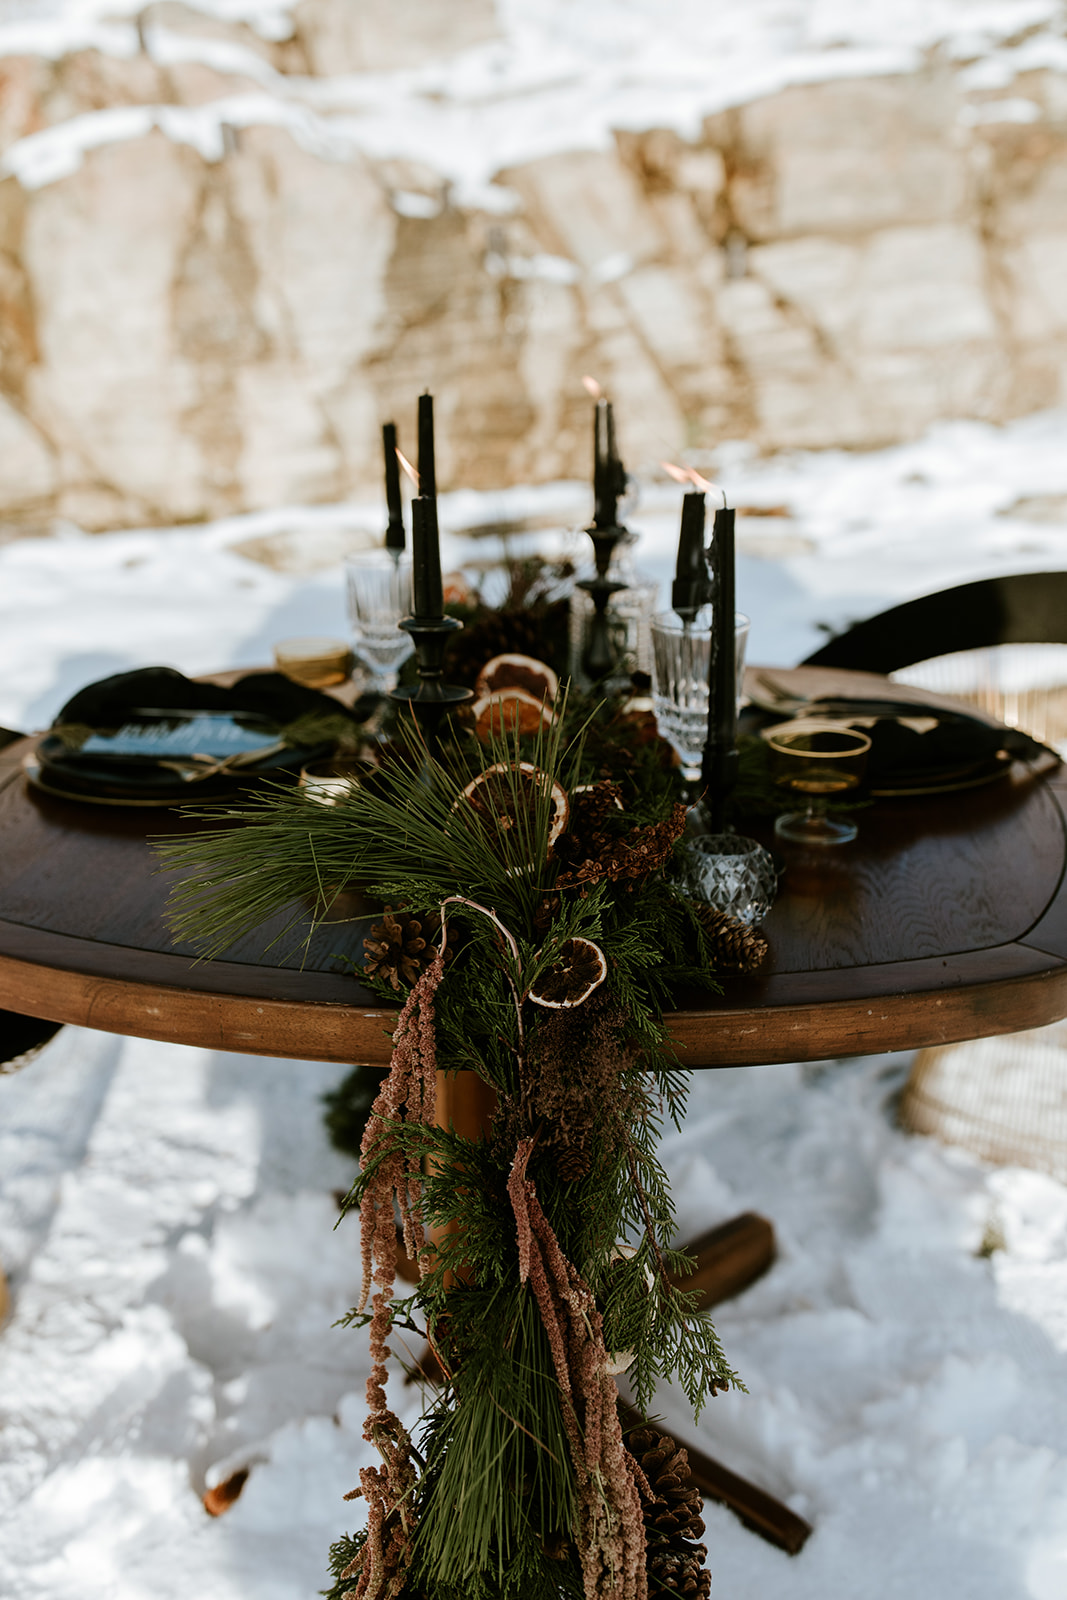 Winter Wedding Sweetheart Table with Green garland and candied oranges, black candlesticks, rustic vintage wedding style